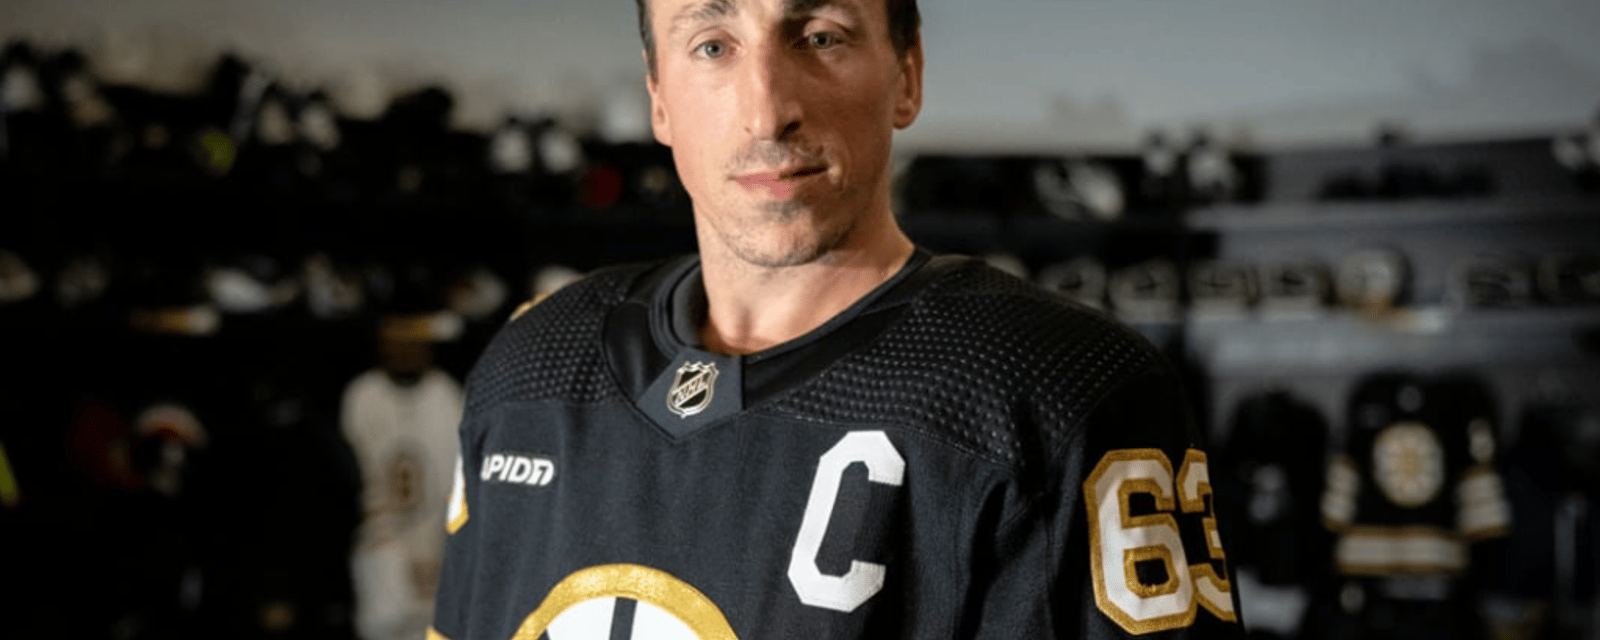 Brad Marchand sounds off on NHL's ban of Pride tape 